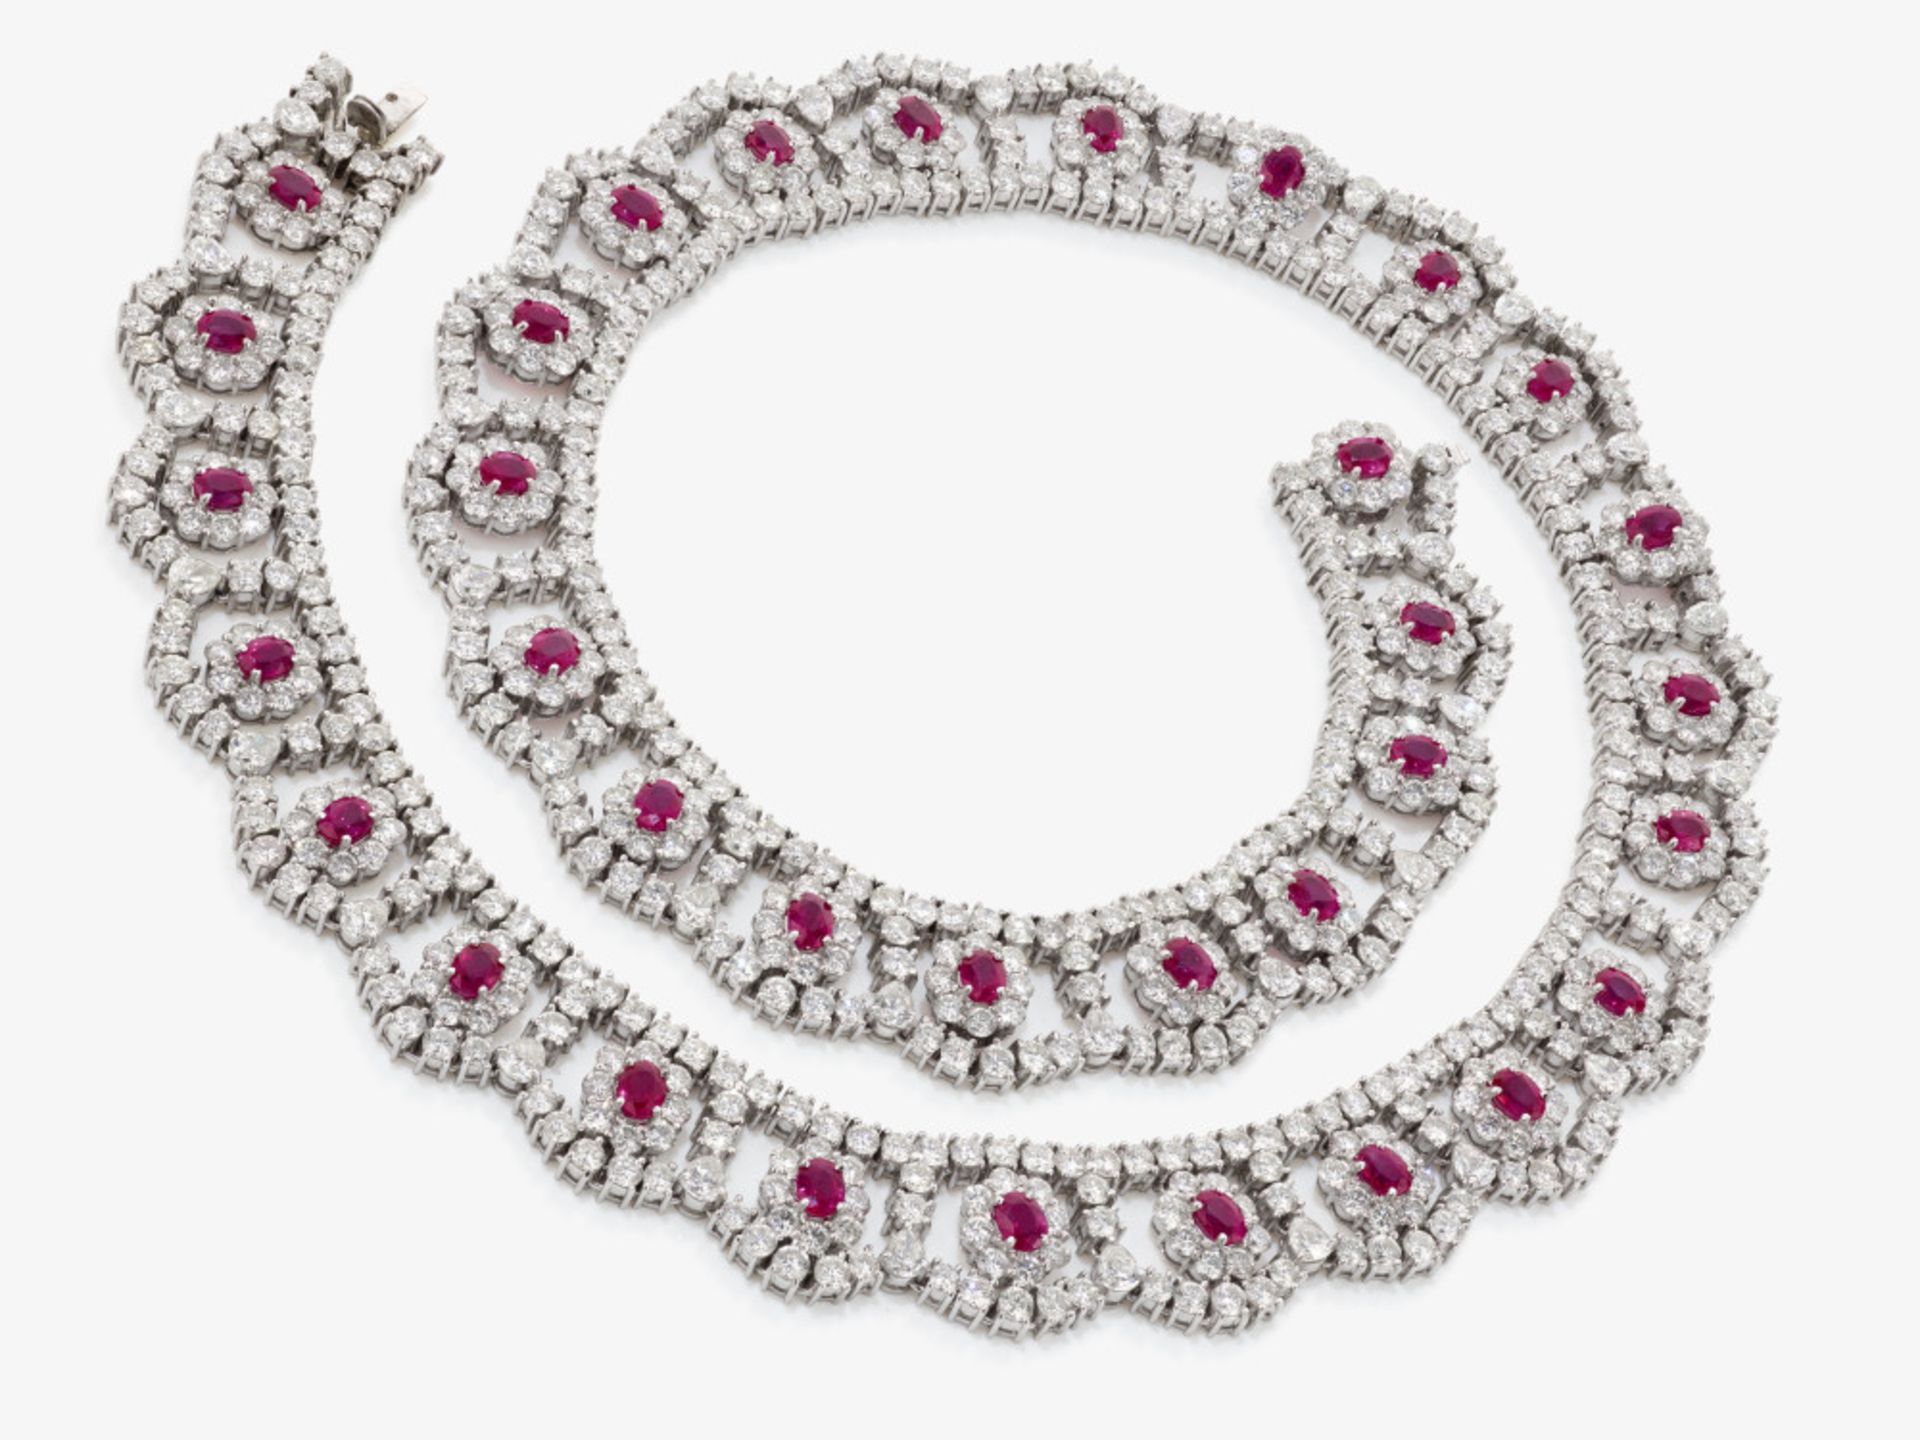 A necklace with rubies and brilliant-cut diamonds - Image 2 of 4